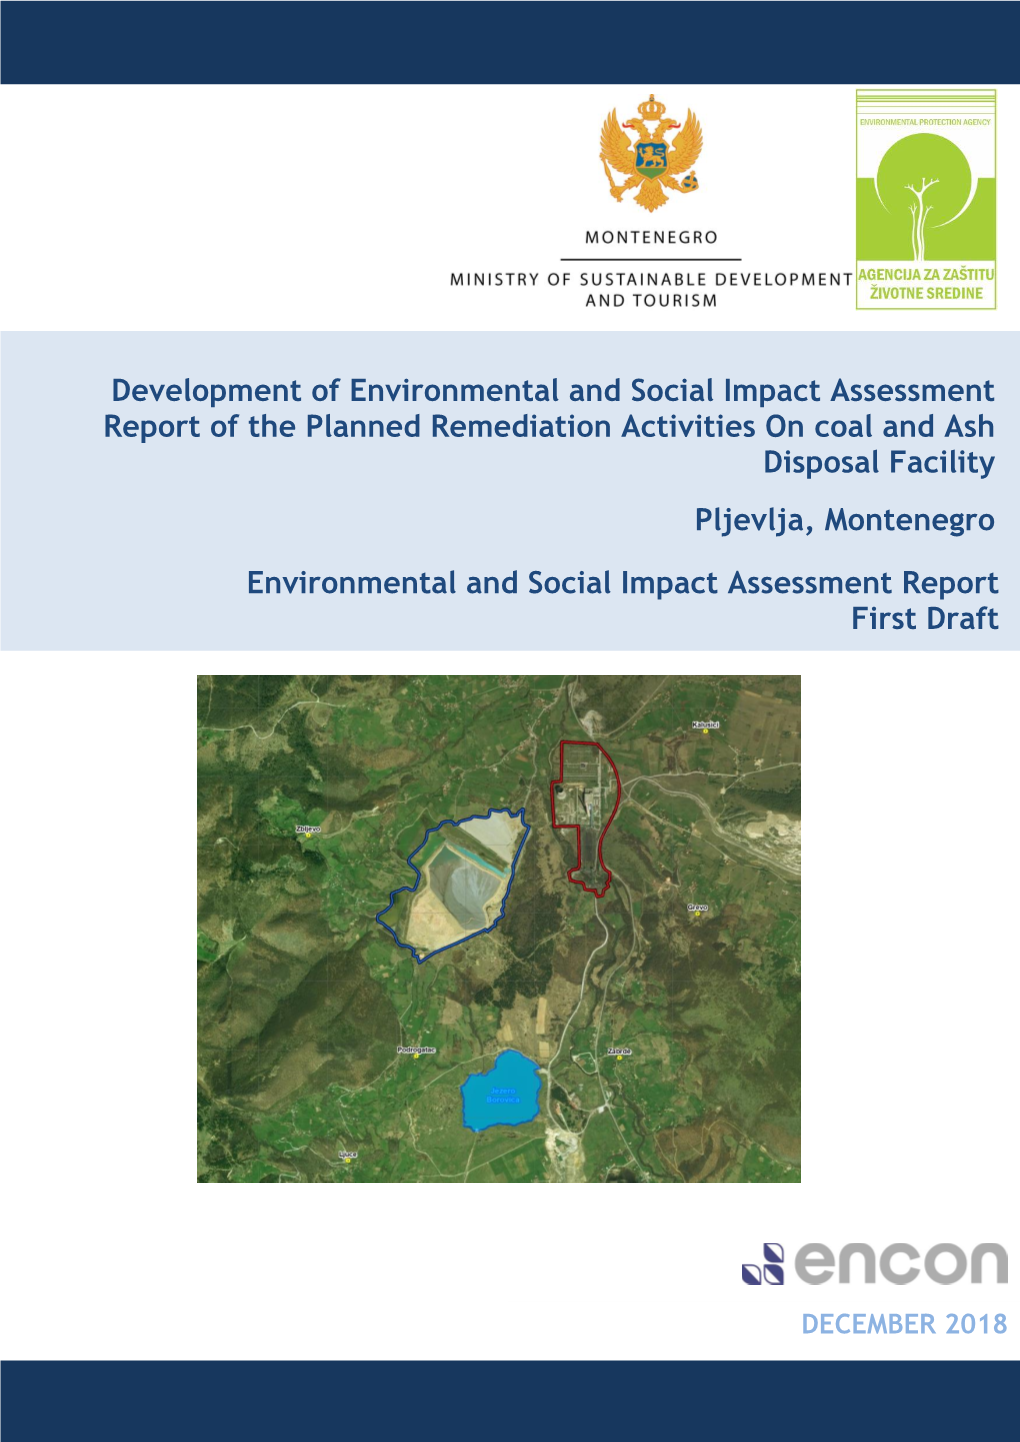 Development of Environmental and Social Impact Assessment Report of the Planned Remediation Activities on Coal and Ash Disposal Facility